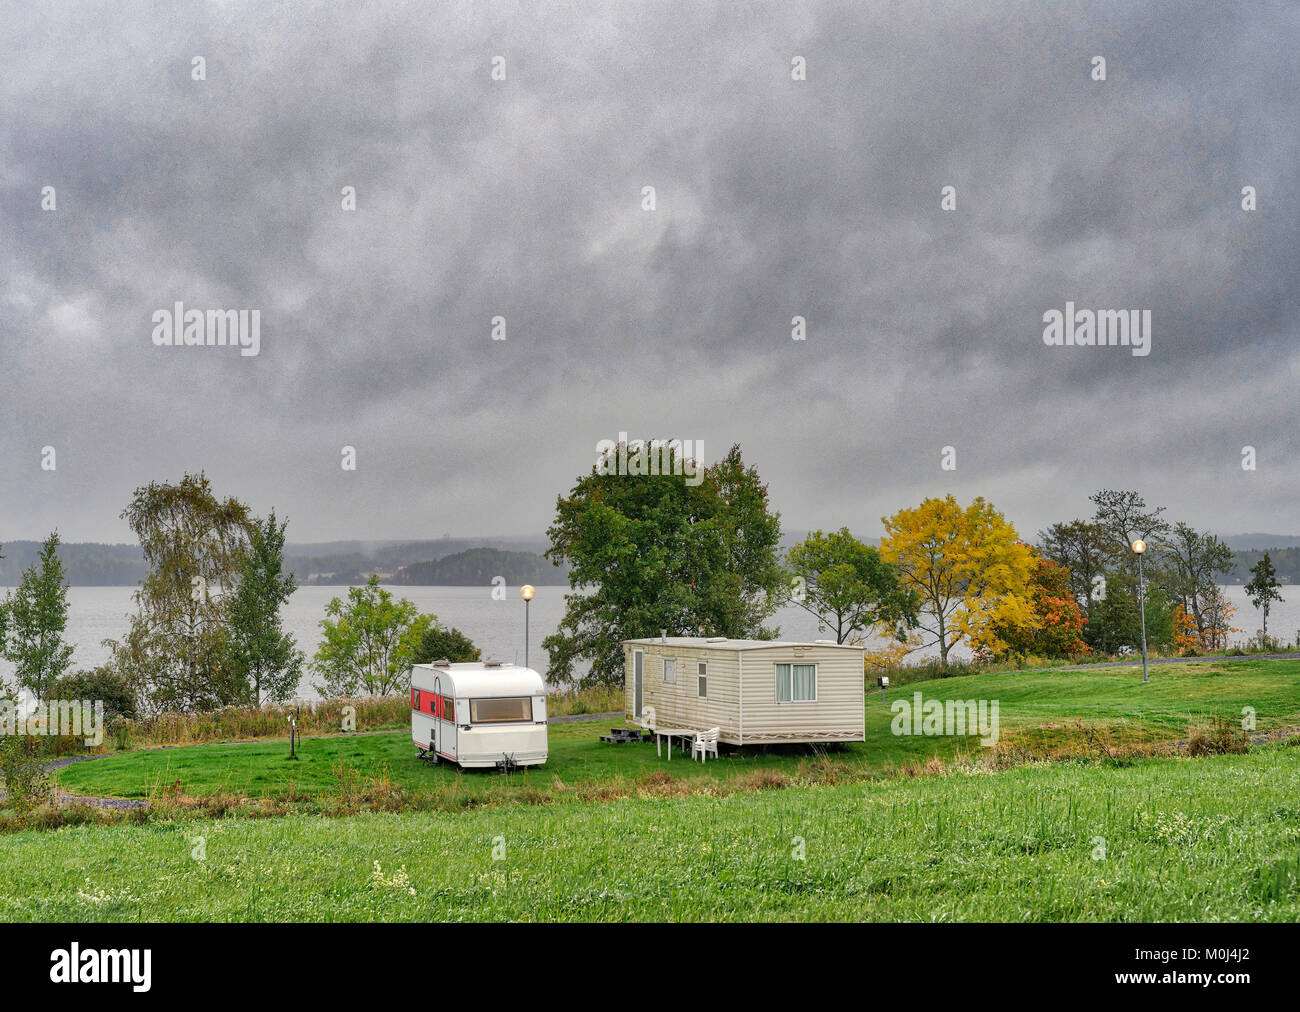 Off season  in a campsite with two caravans Stock Photo